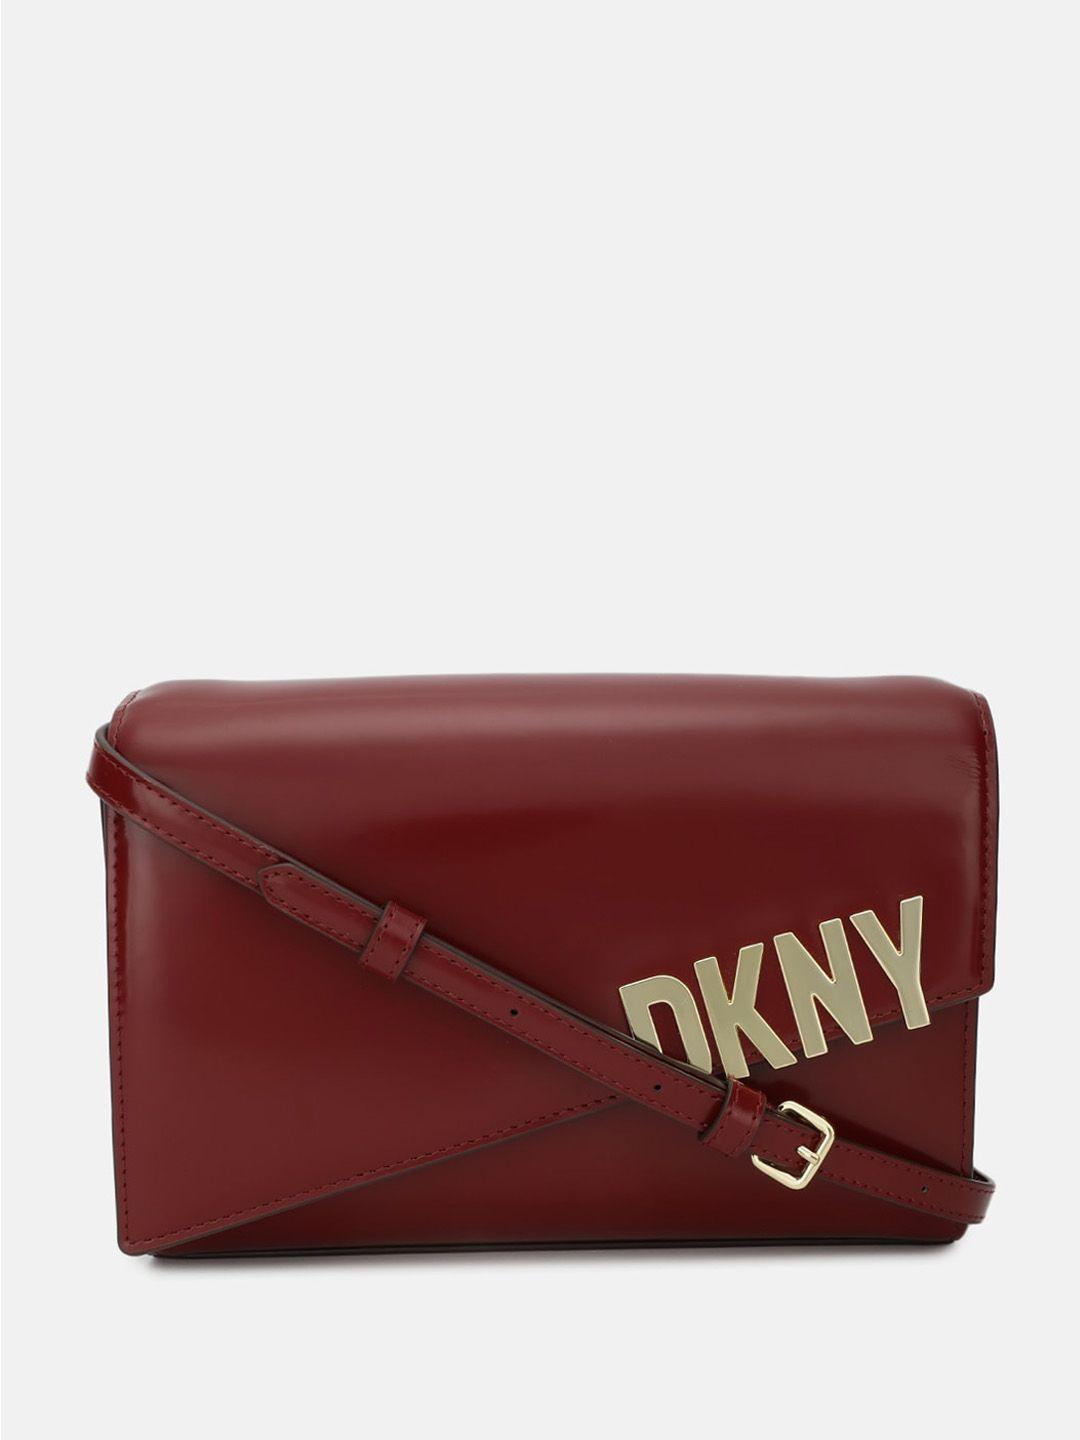 dkny leather structured sling bag